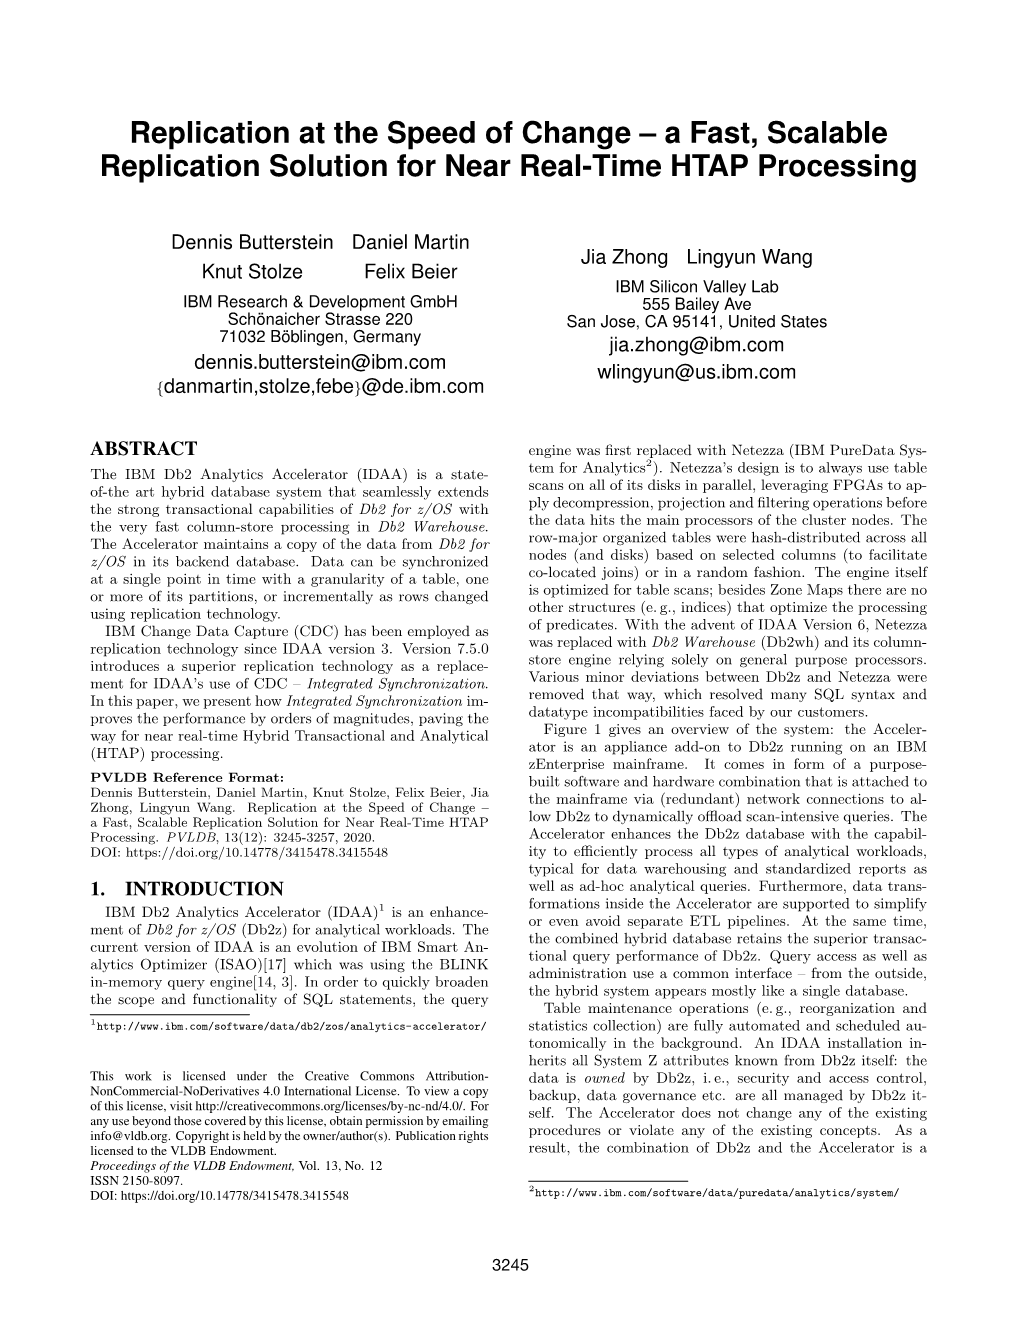 Replication at the Speed of Change – a Fast, Scalable Replication Solution for Near Real-Time HTAP Processing